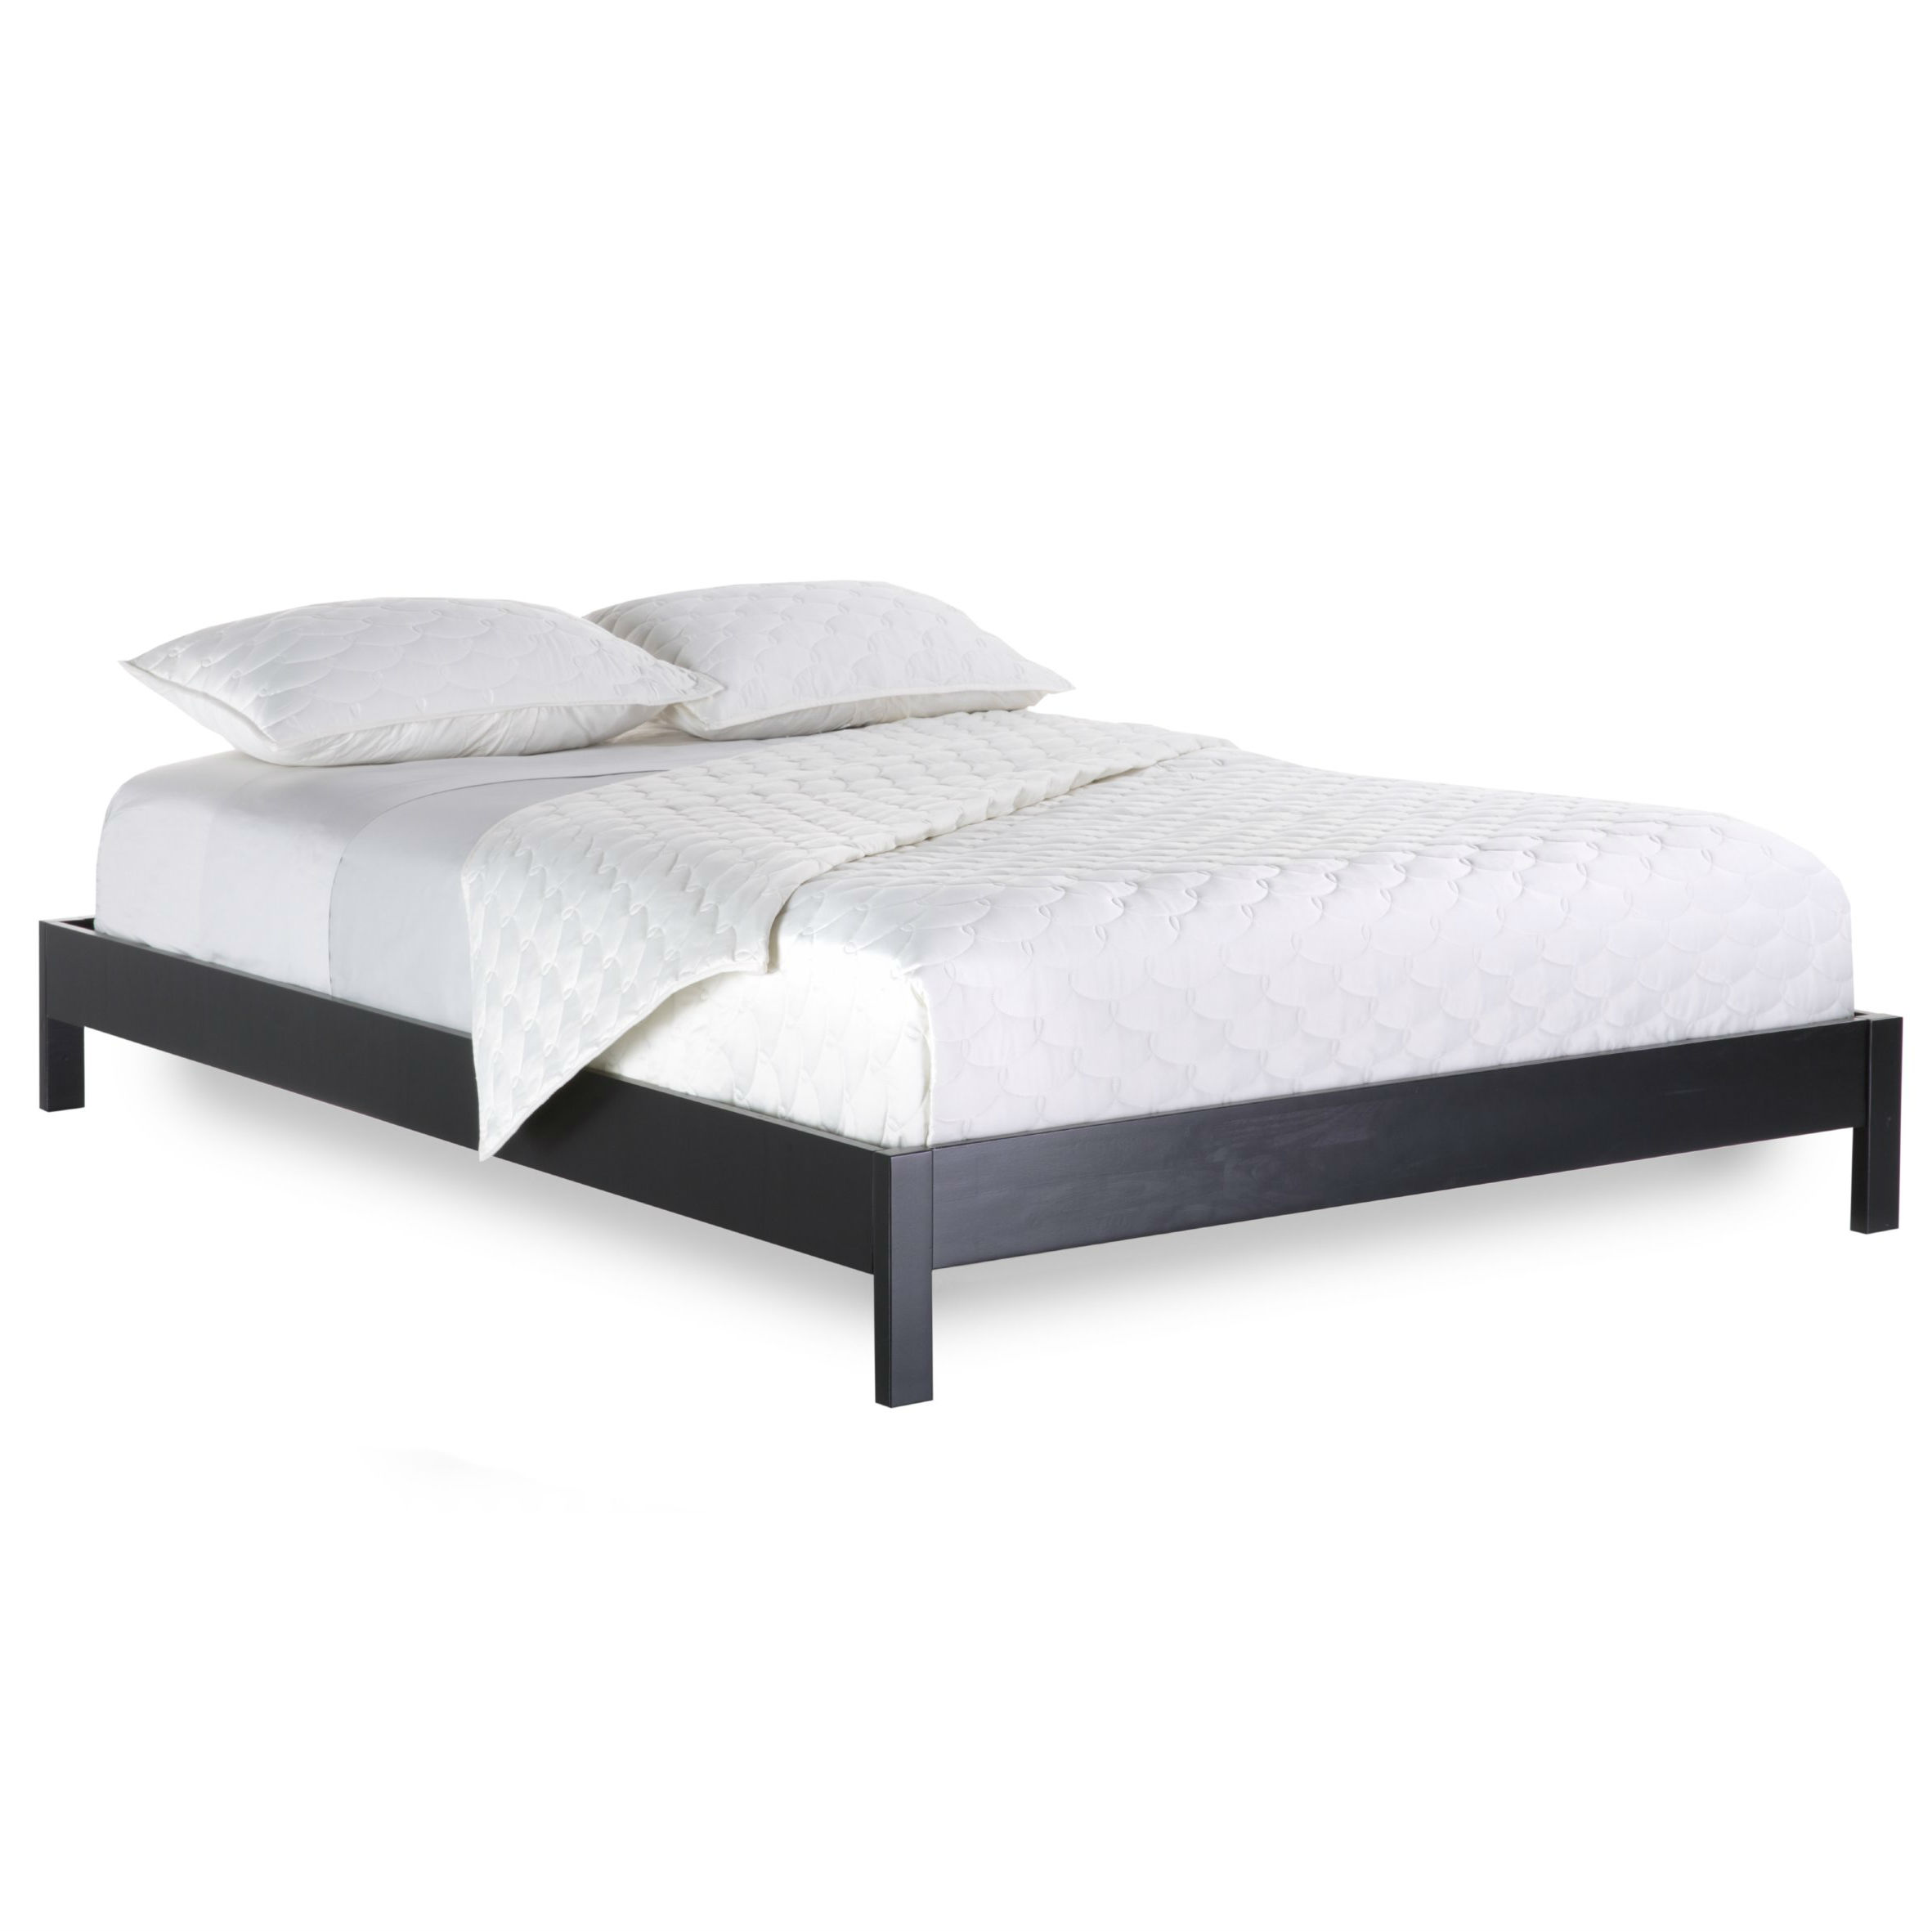 Good Looking asian style bed frames Greenhome123 Modern Asian Style Black Wood Platform Bed Frame